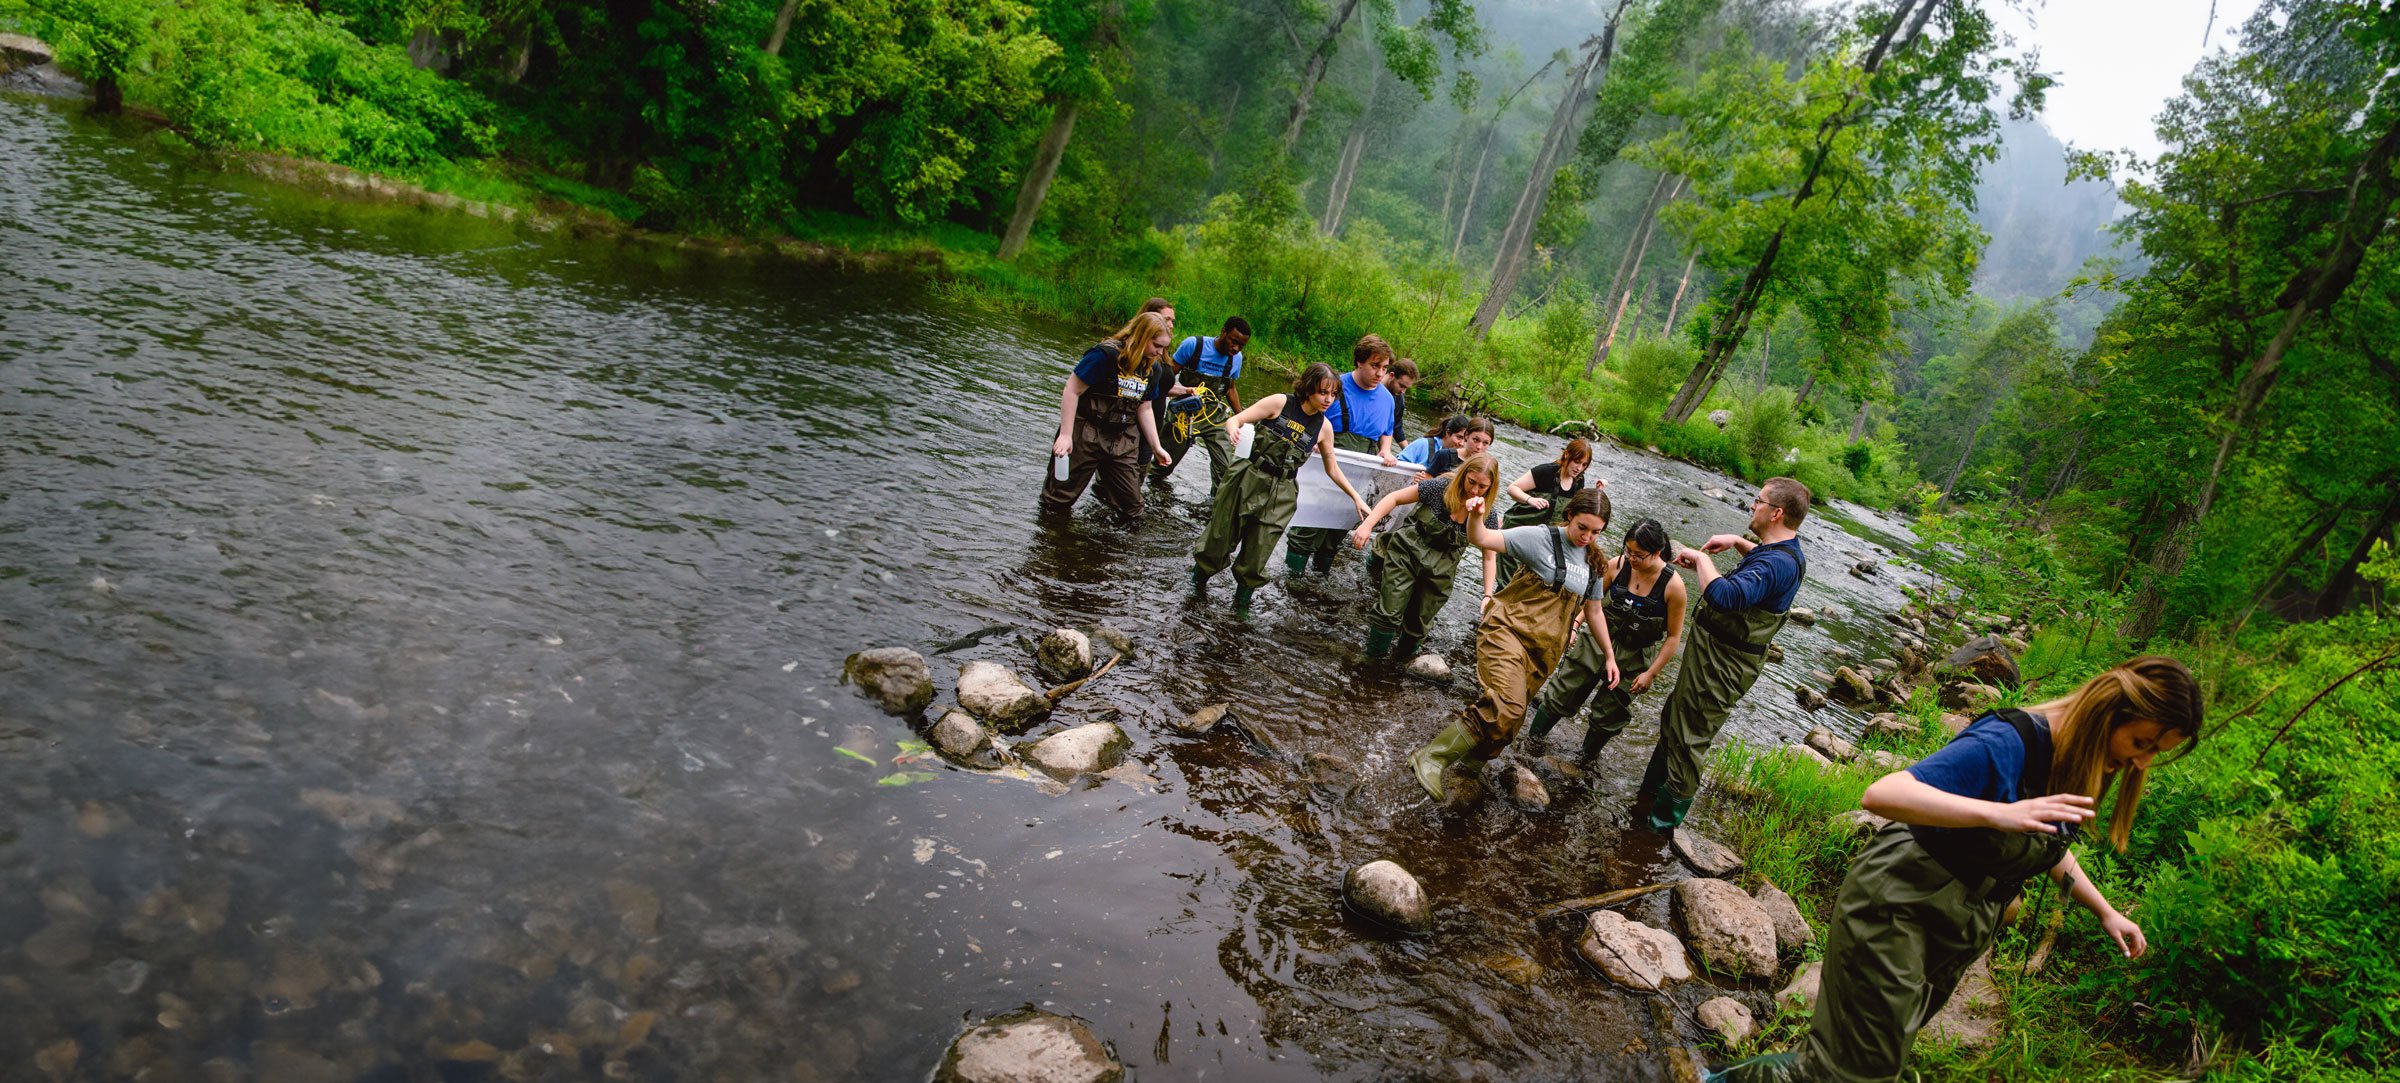 Students walk through a river during an analysis lab.